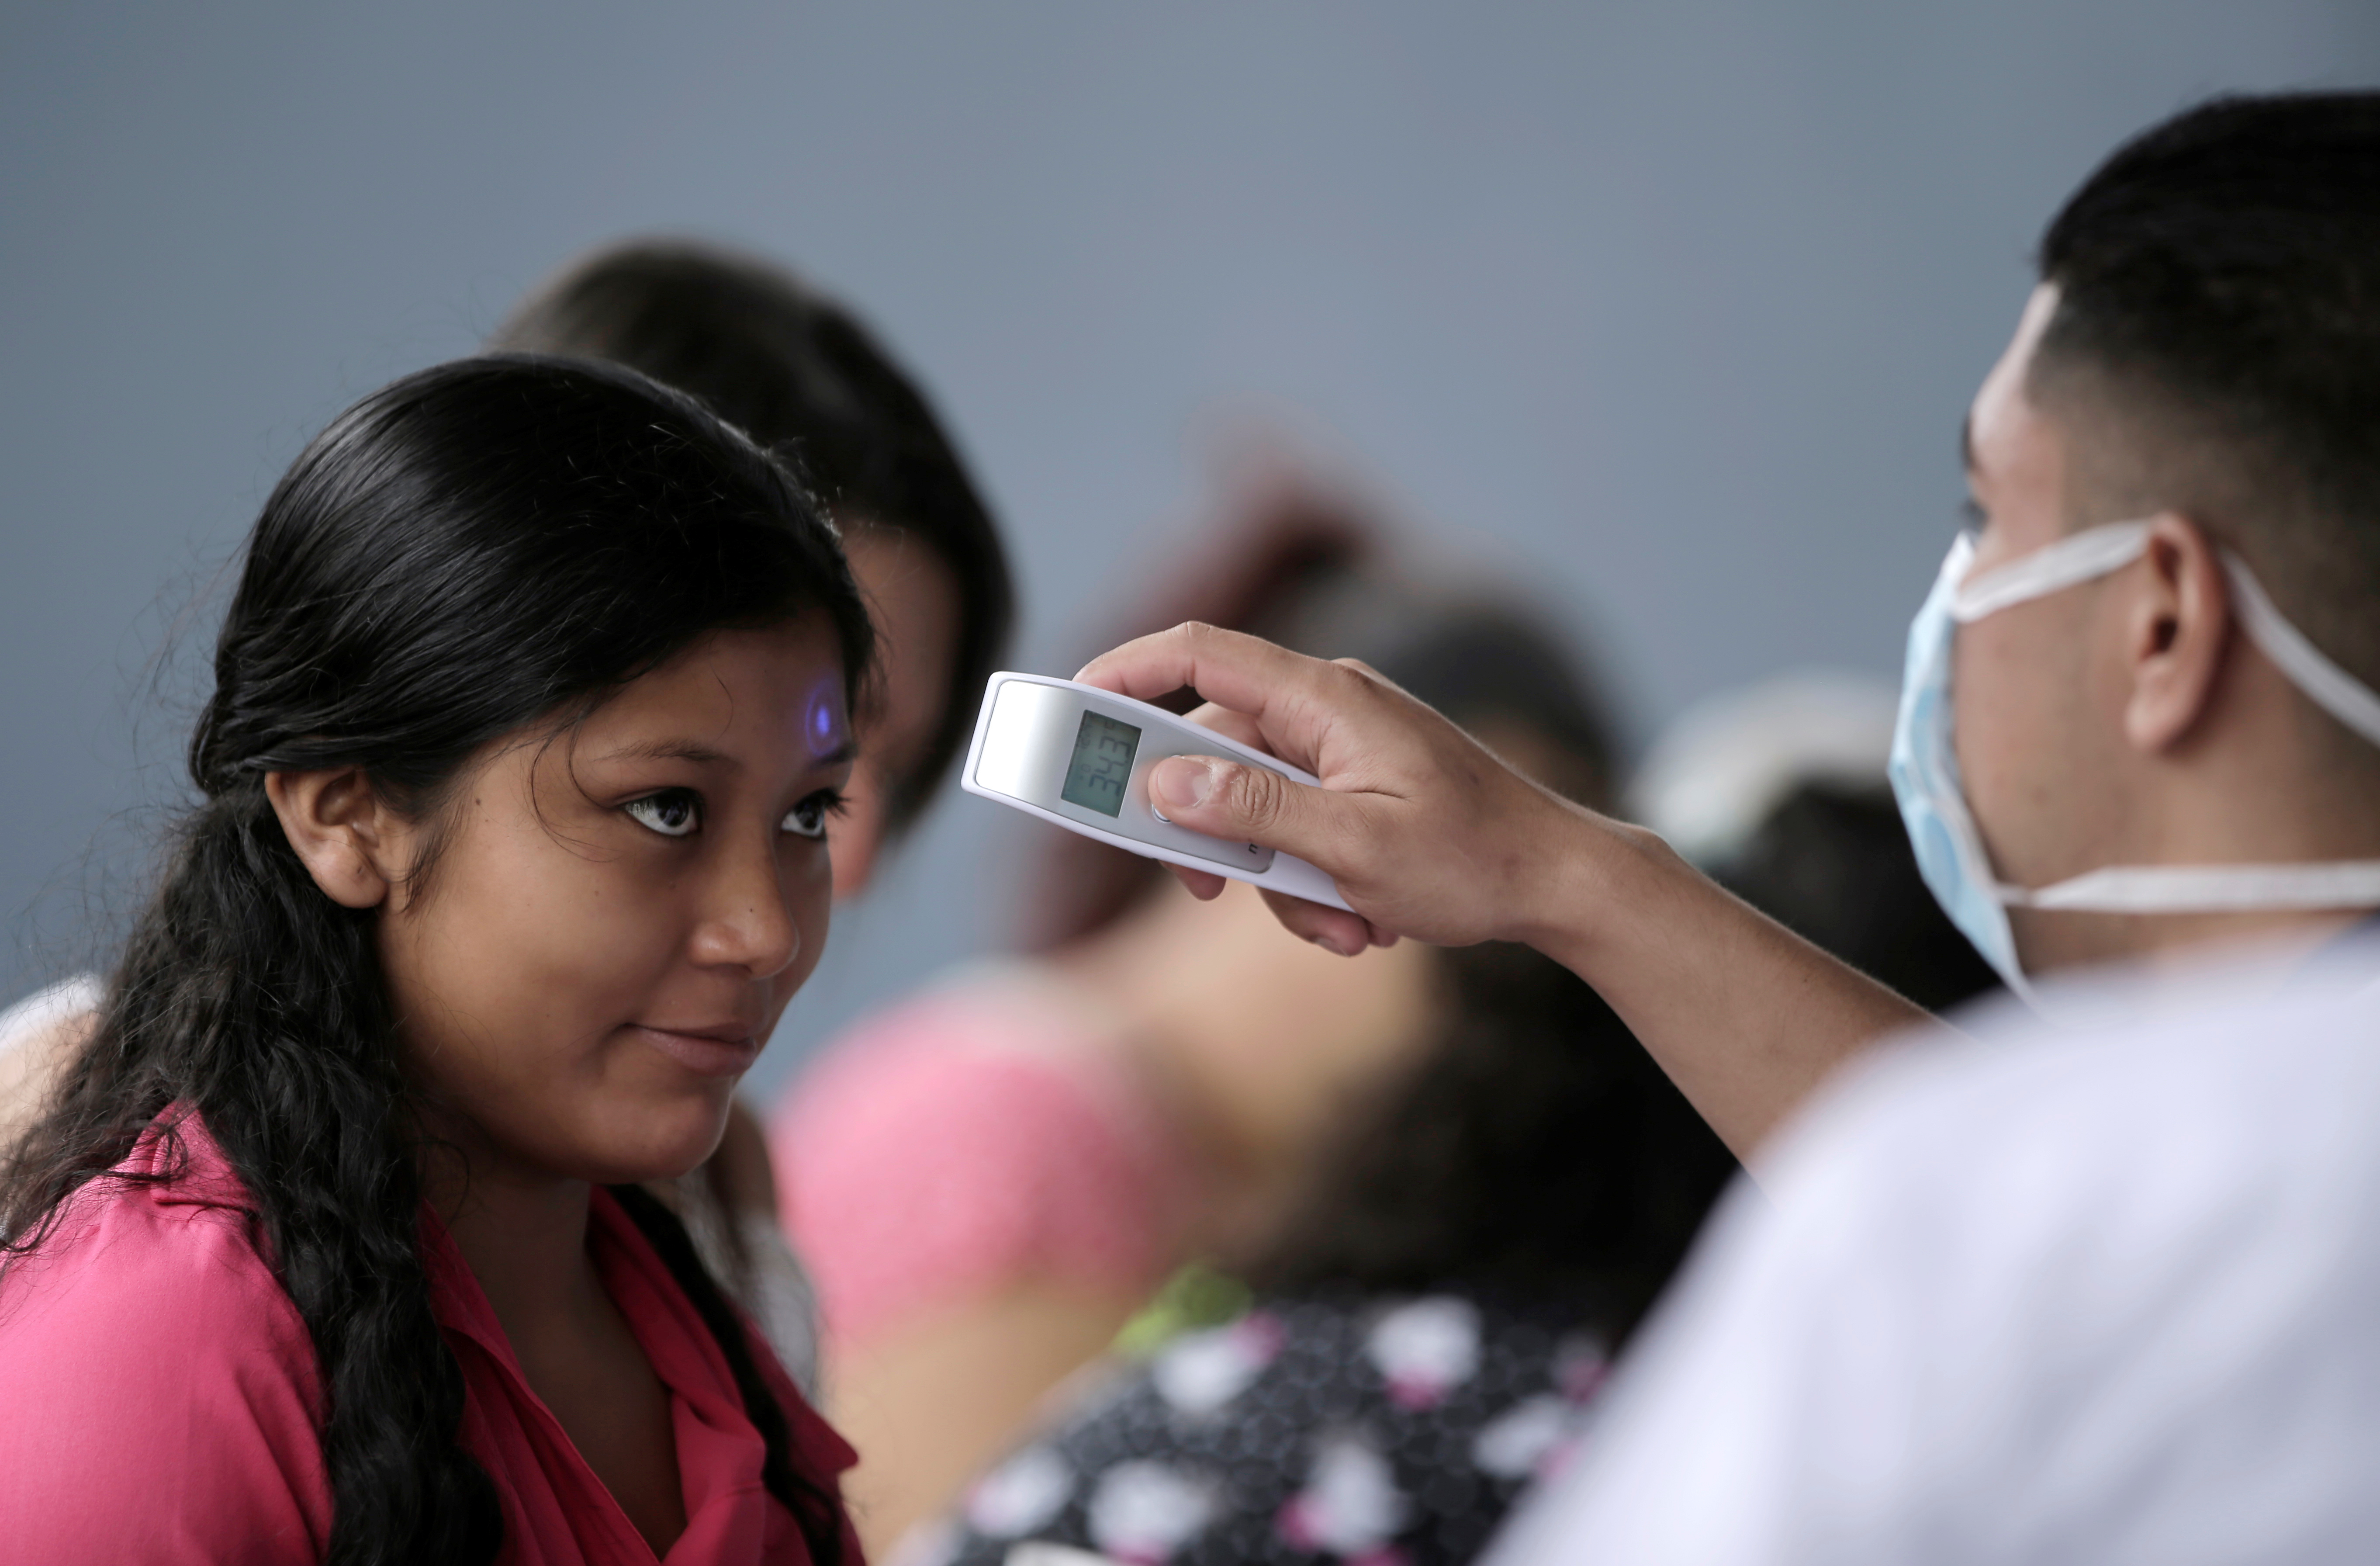 A public health worker records a woman’s temperature before she enters a health center, as part of preventive measure against COVID-19, in San José, Costa Rica, March 12, 2020. 